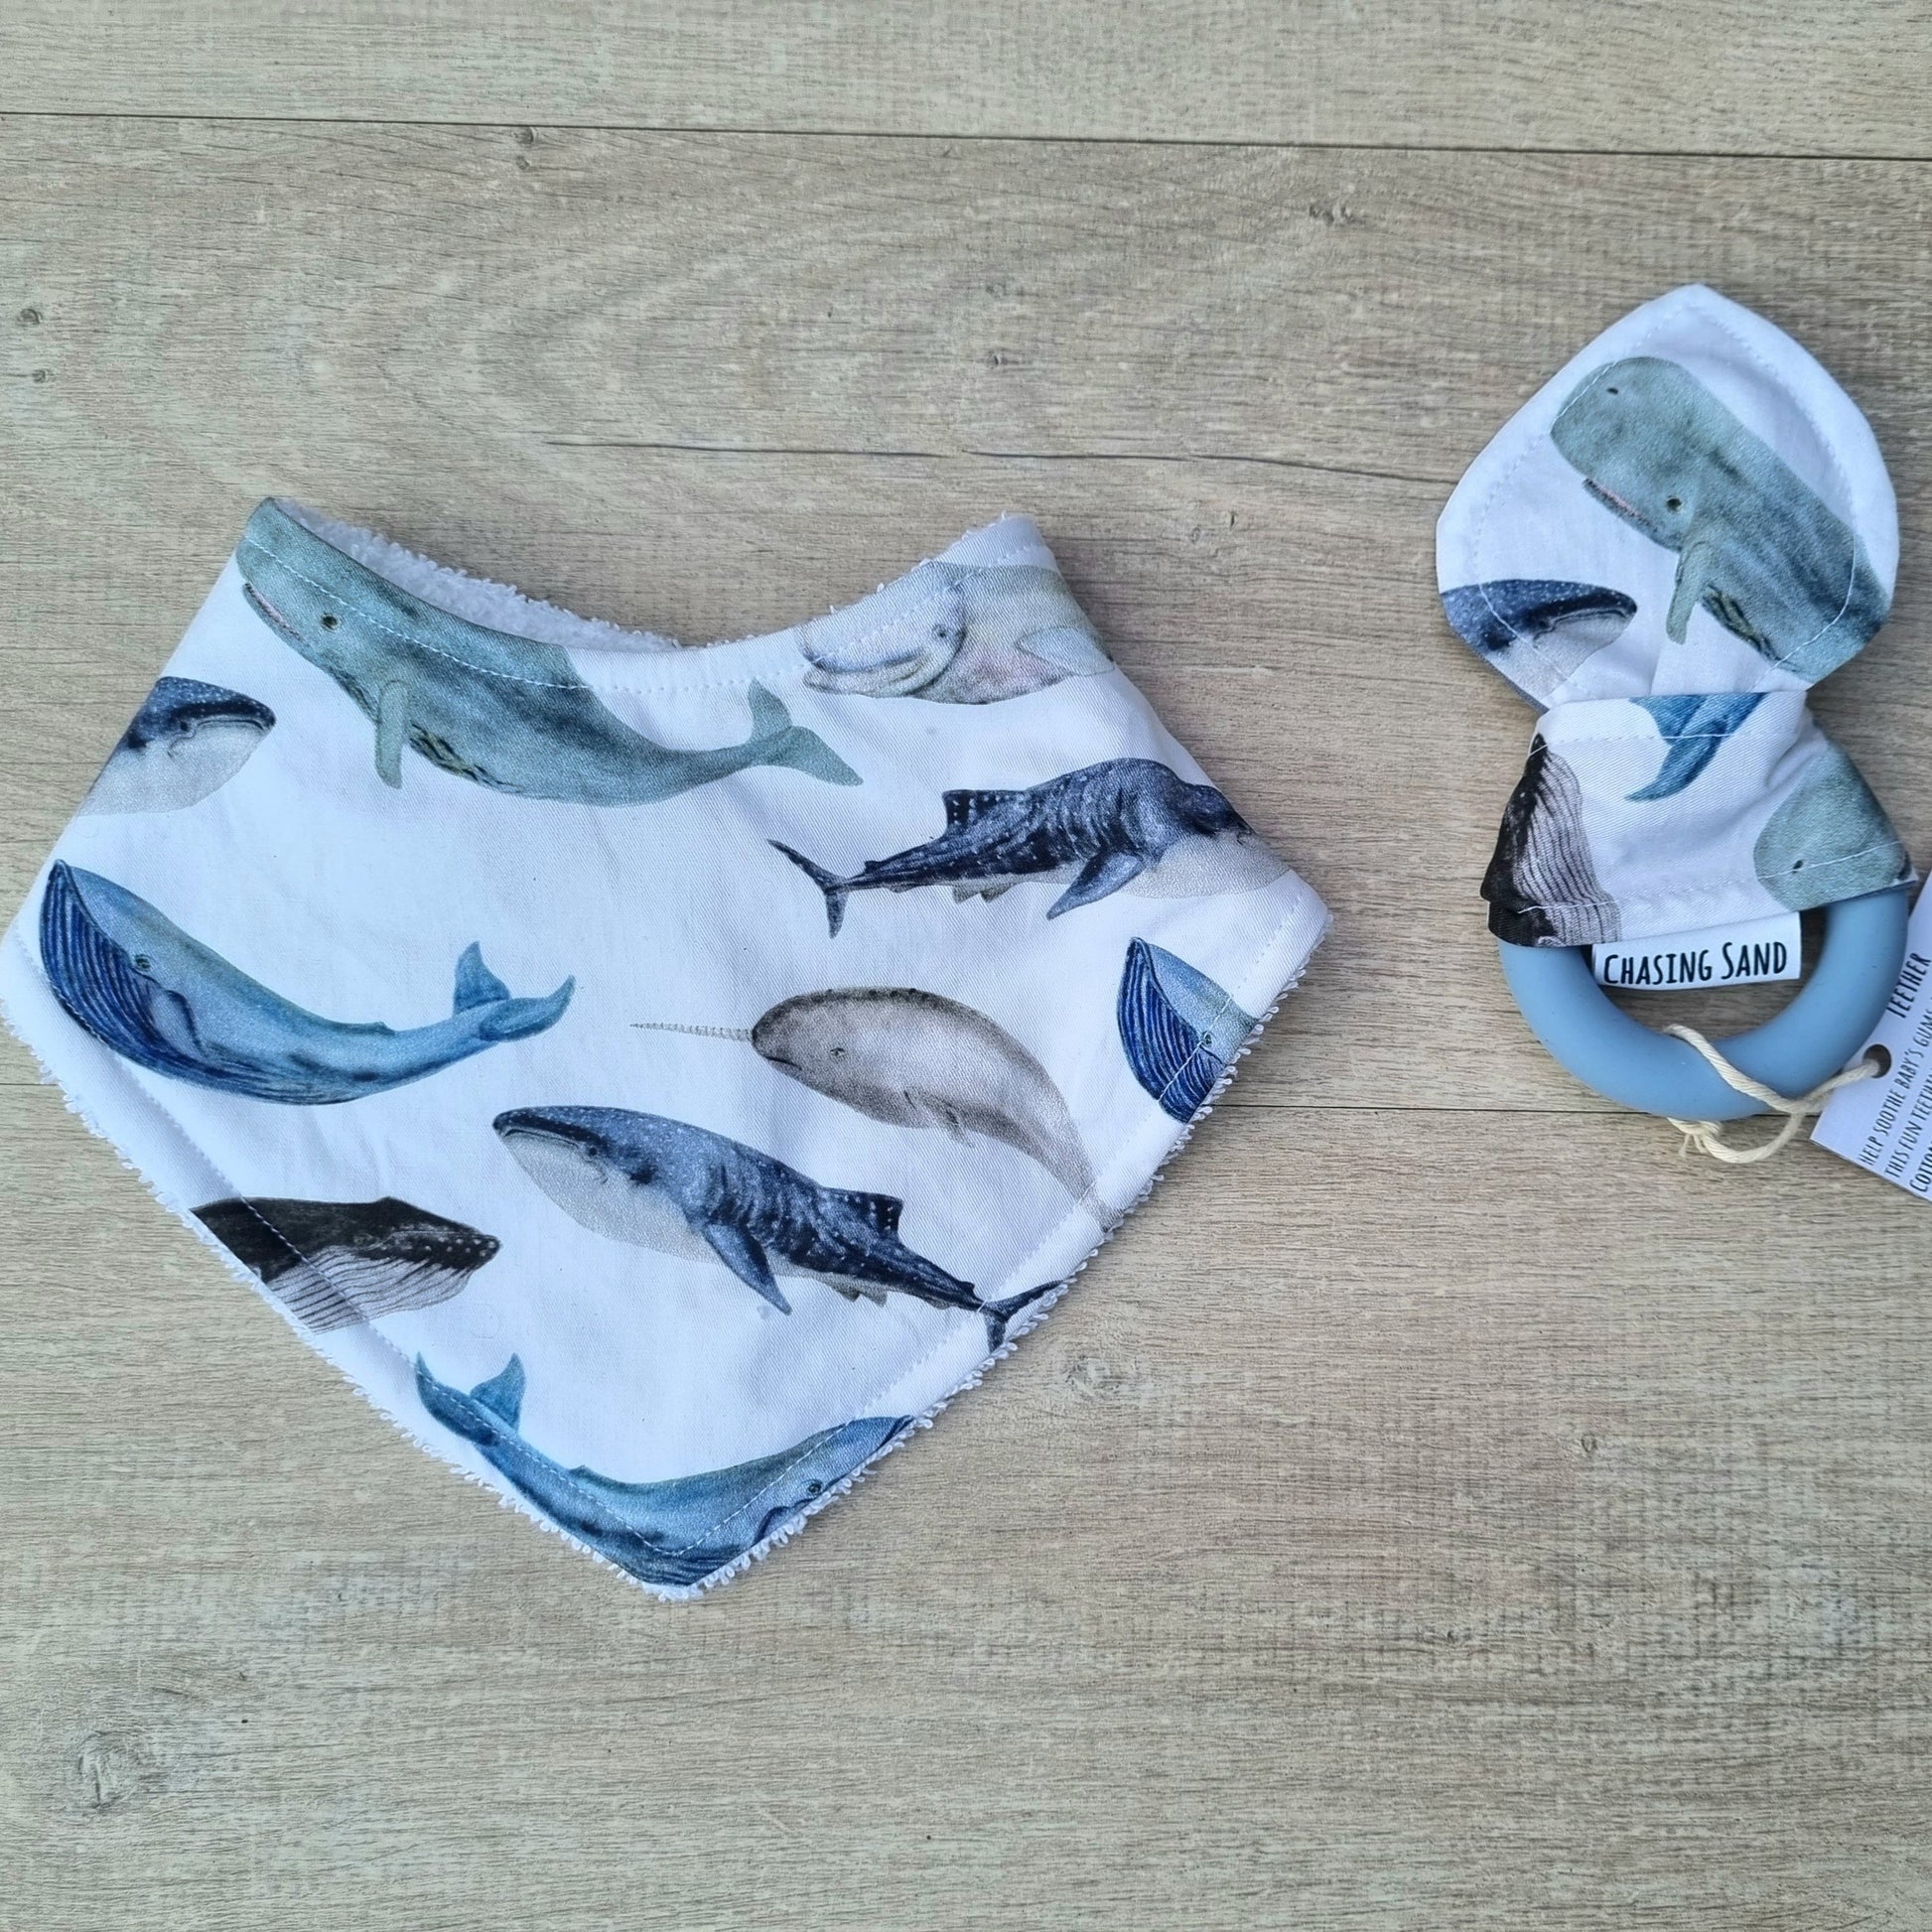 2 Piece Gift Set - Ocean against wooden backdrop. Whale illustrations on white background. Each set contains 1x Dribble Bib and 1x Teether.